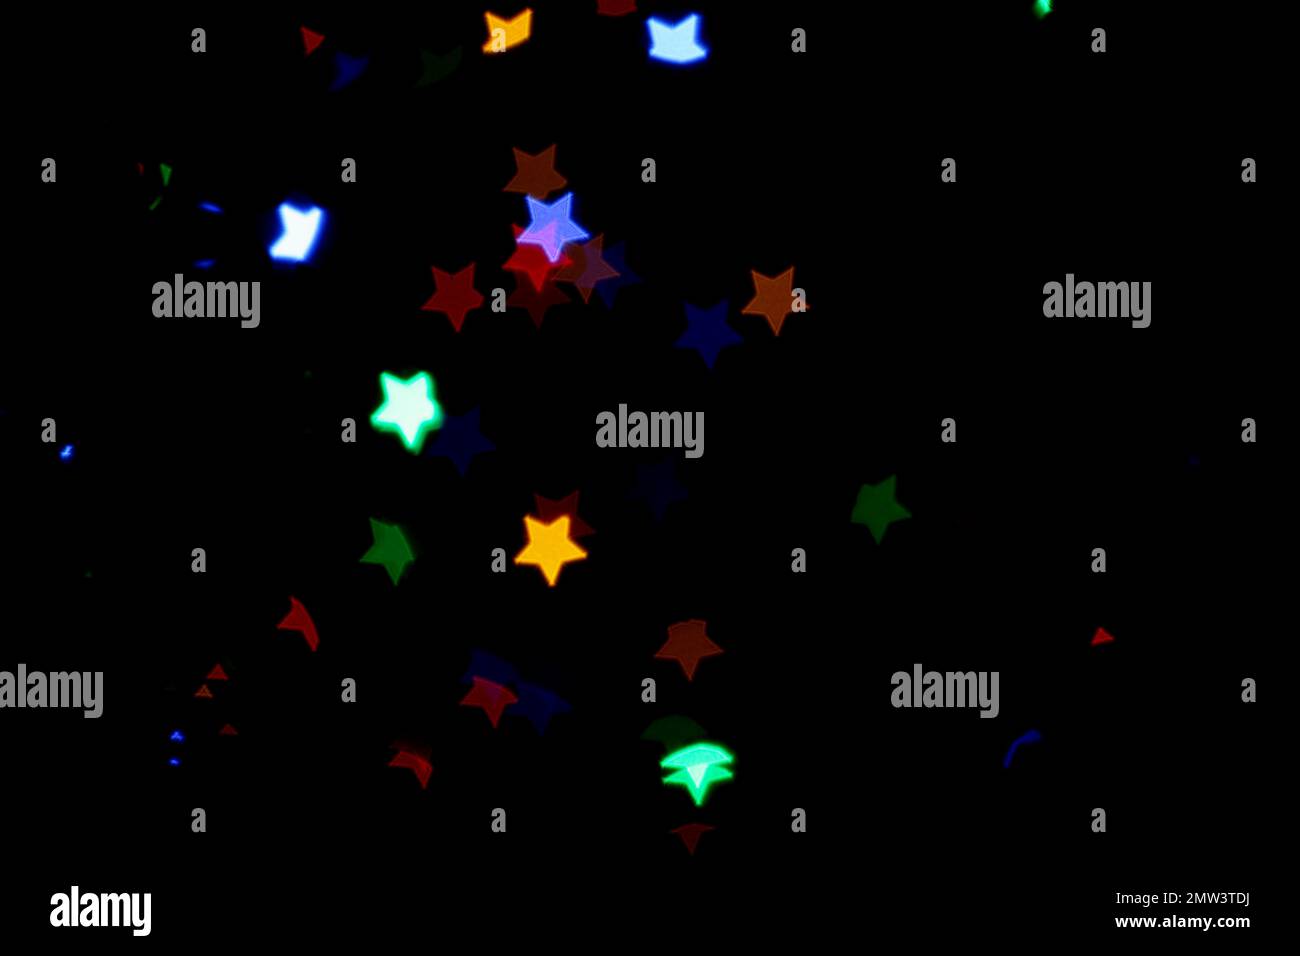 Blurred view of colorful star shaped lights on black background. Bokeh effect Stock Photo